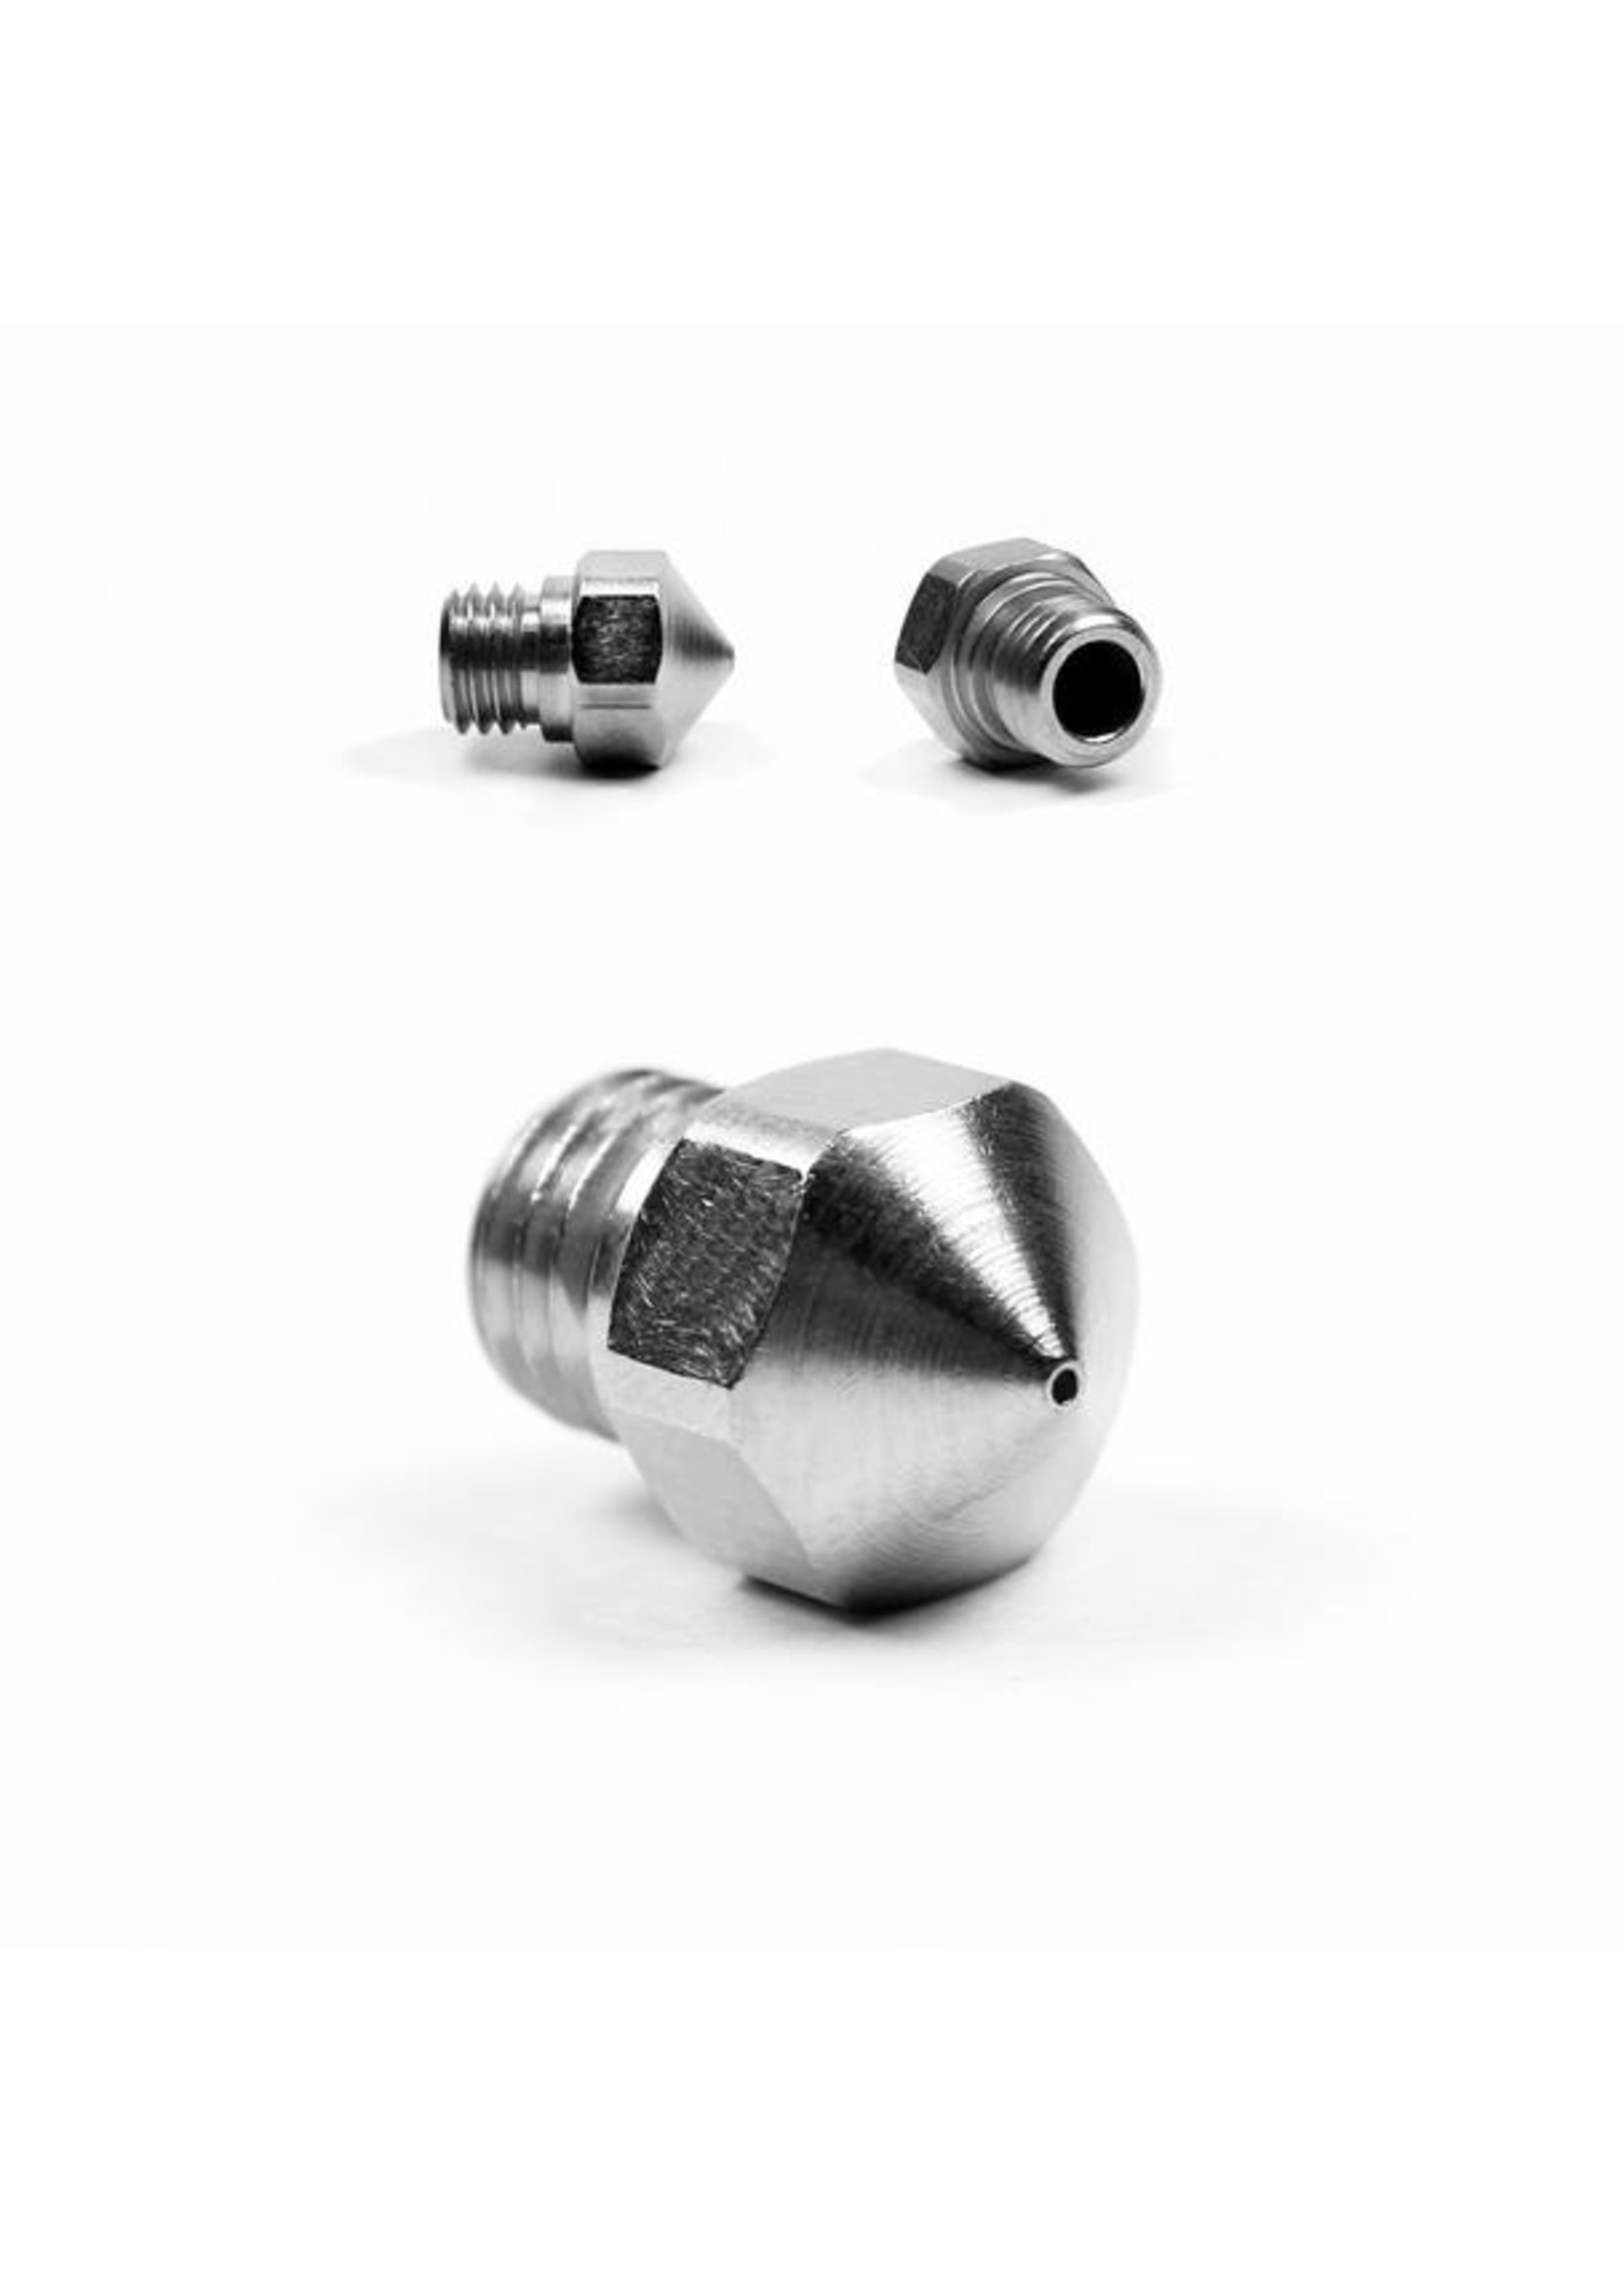 Micro Swiss MK10 Plated Wear Resistant Nozzle for PTFE